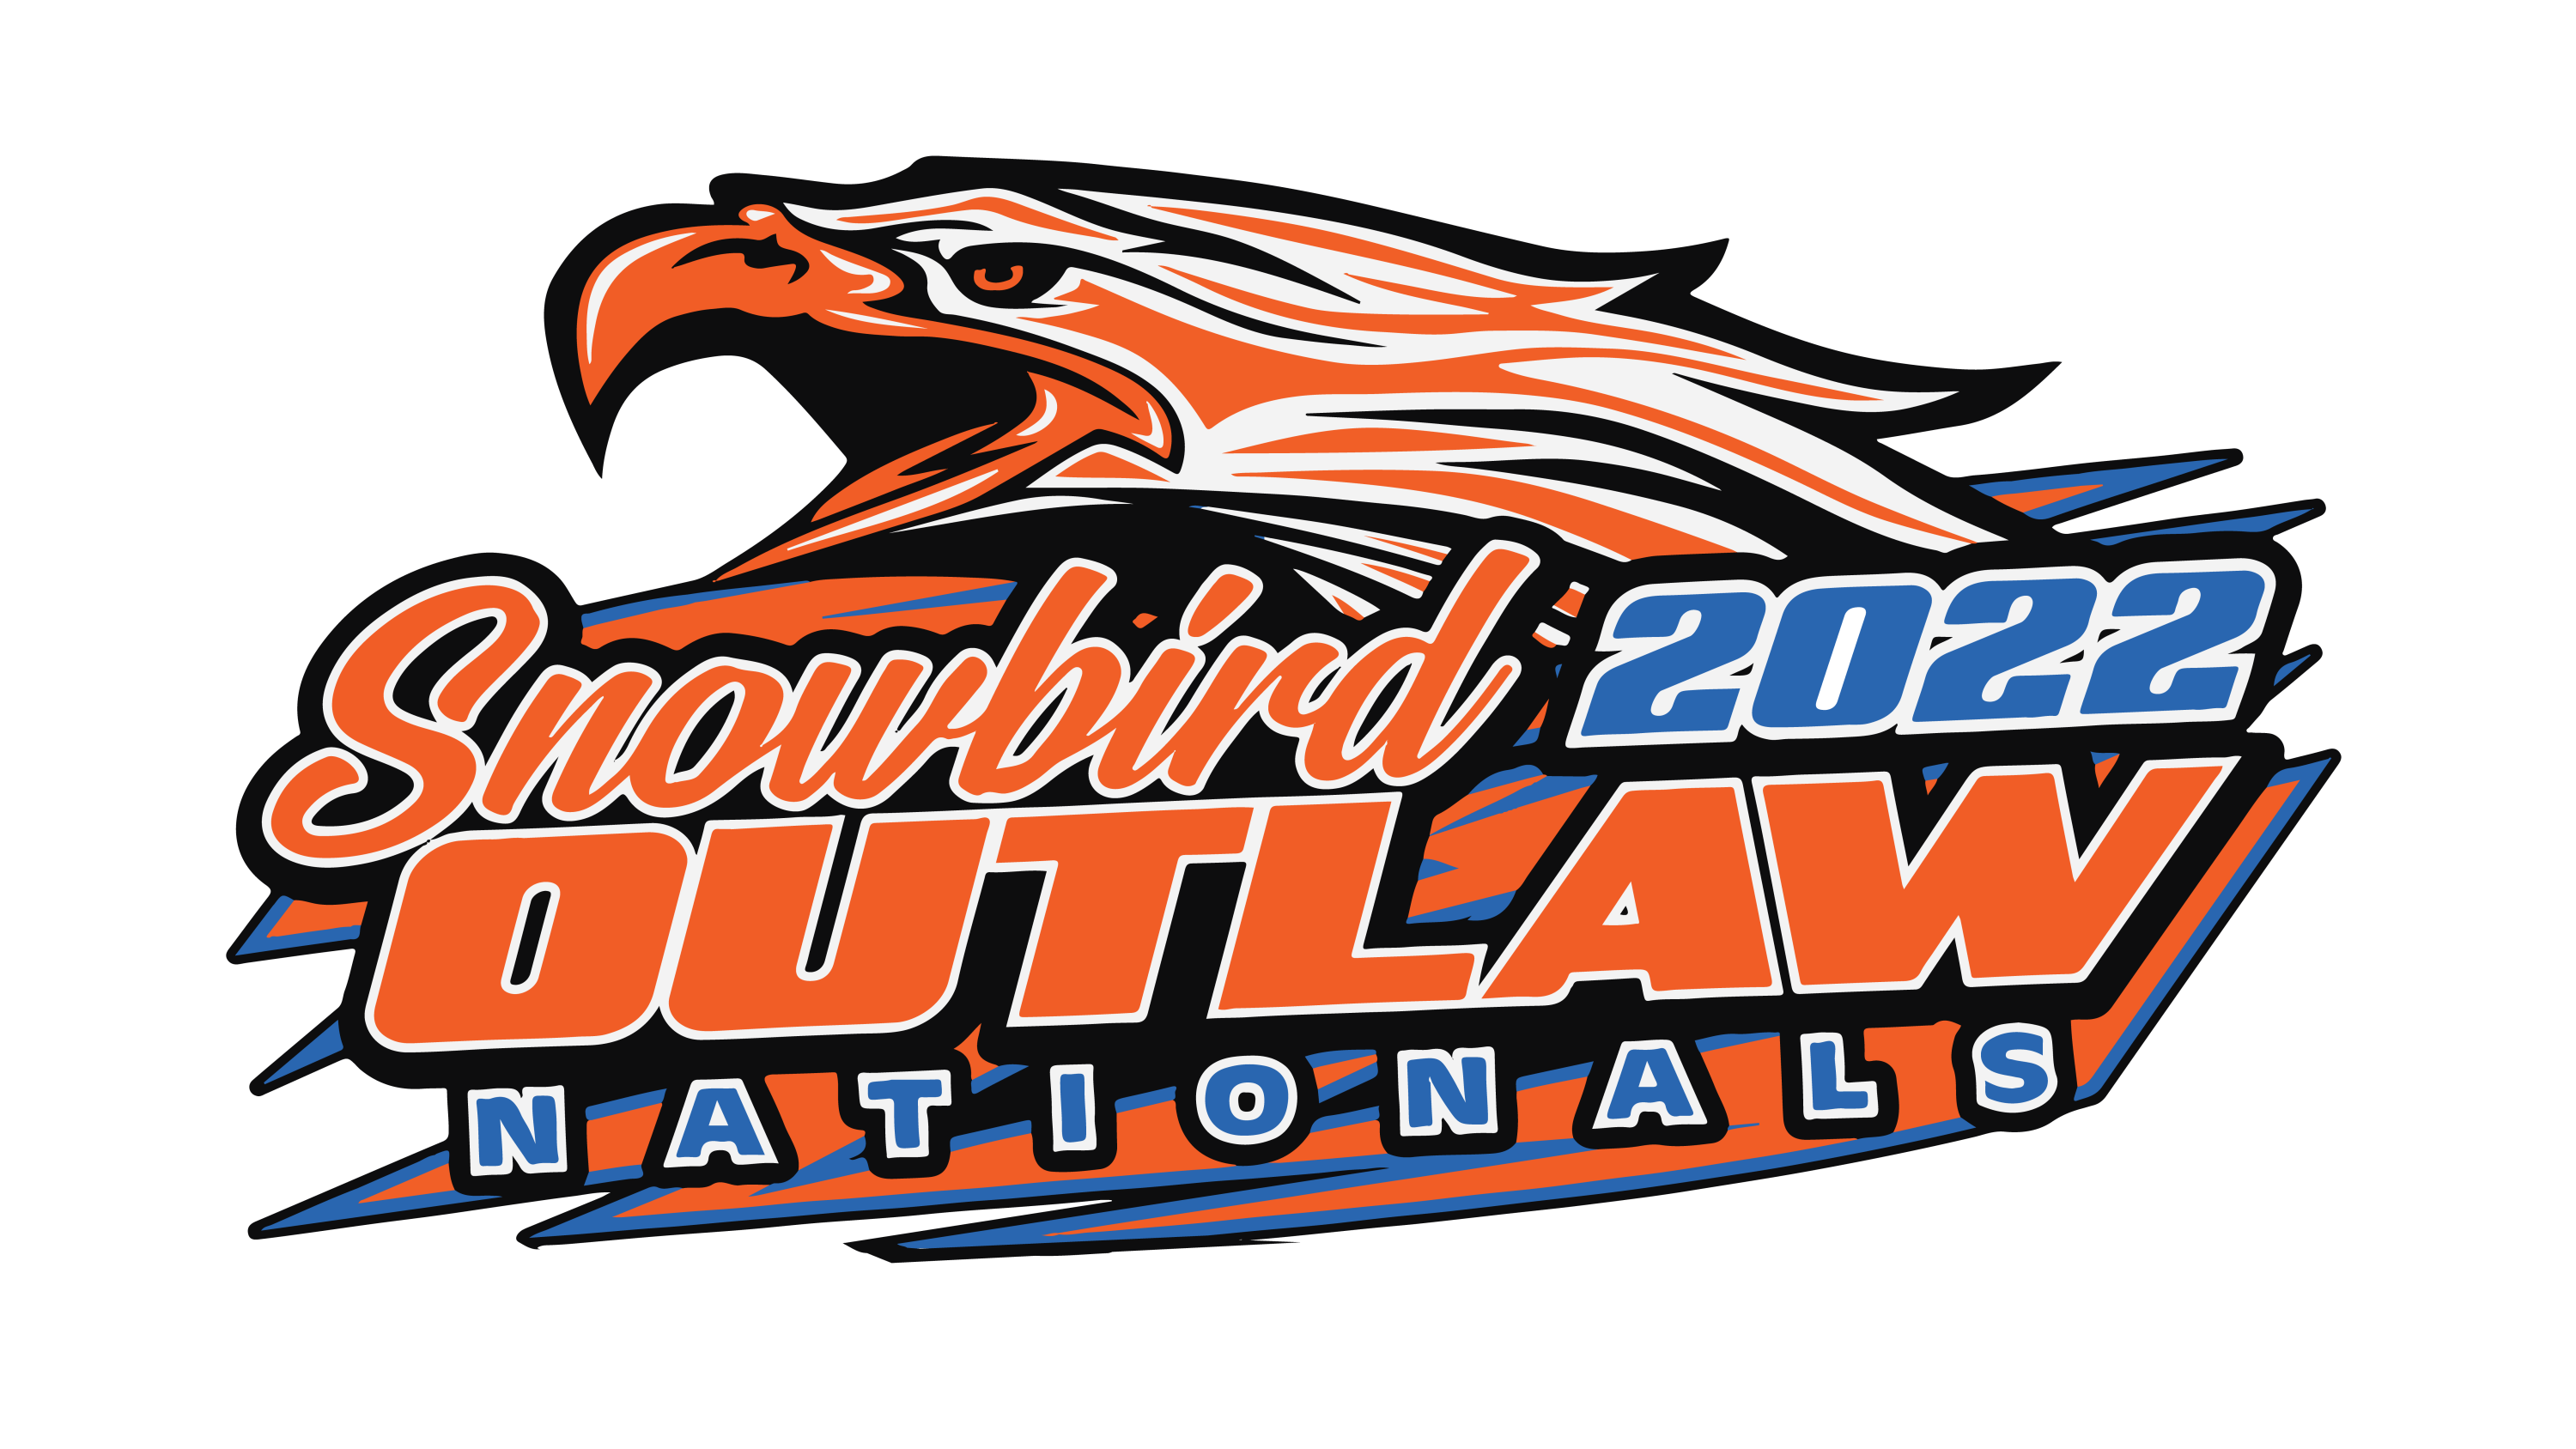 THERE'S 51,000 ON THE LINE AT BRADENTON'S SNOWBIRD OUTLAW NATIONALS